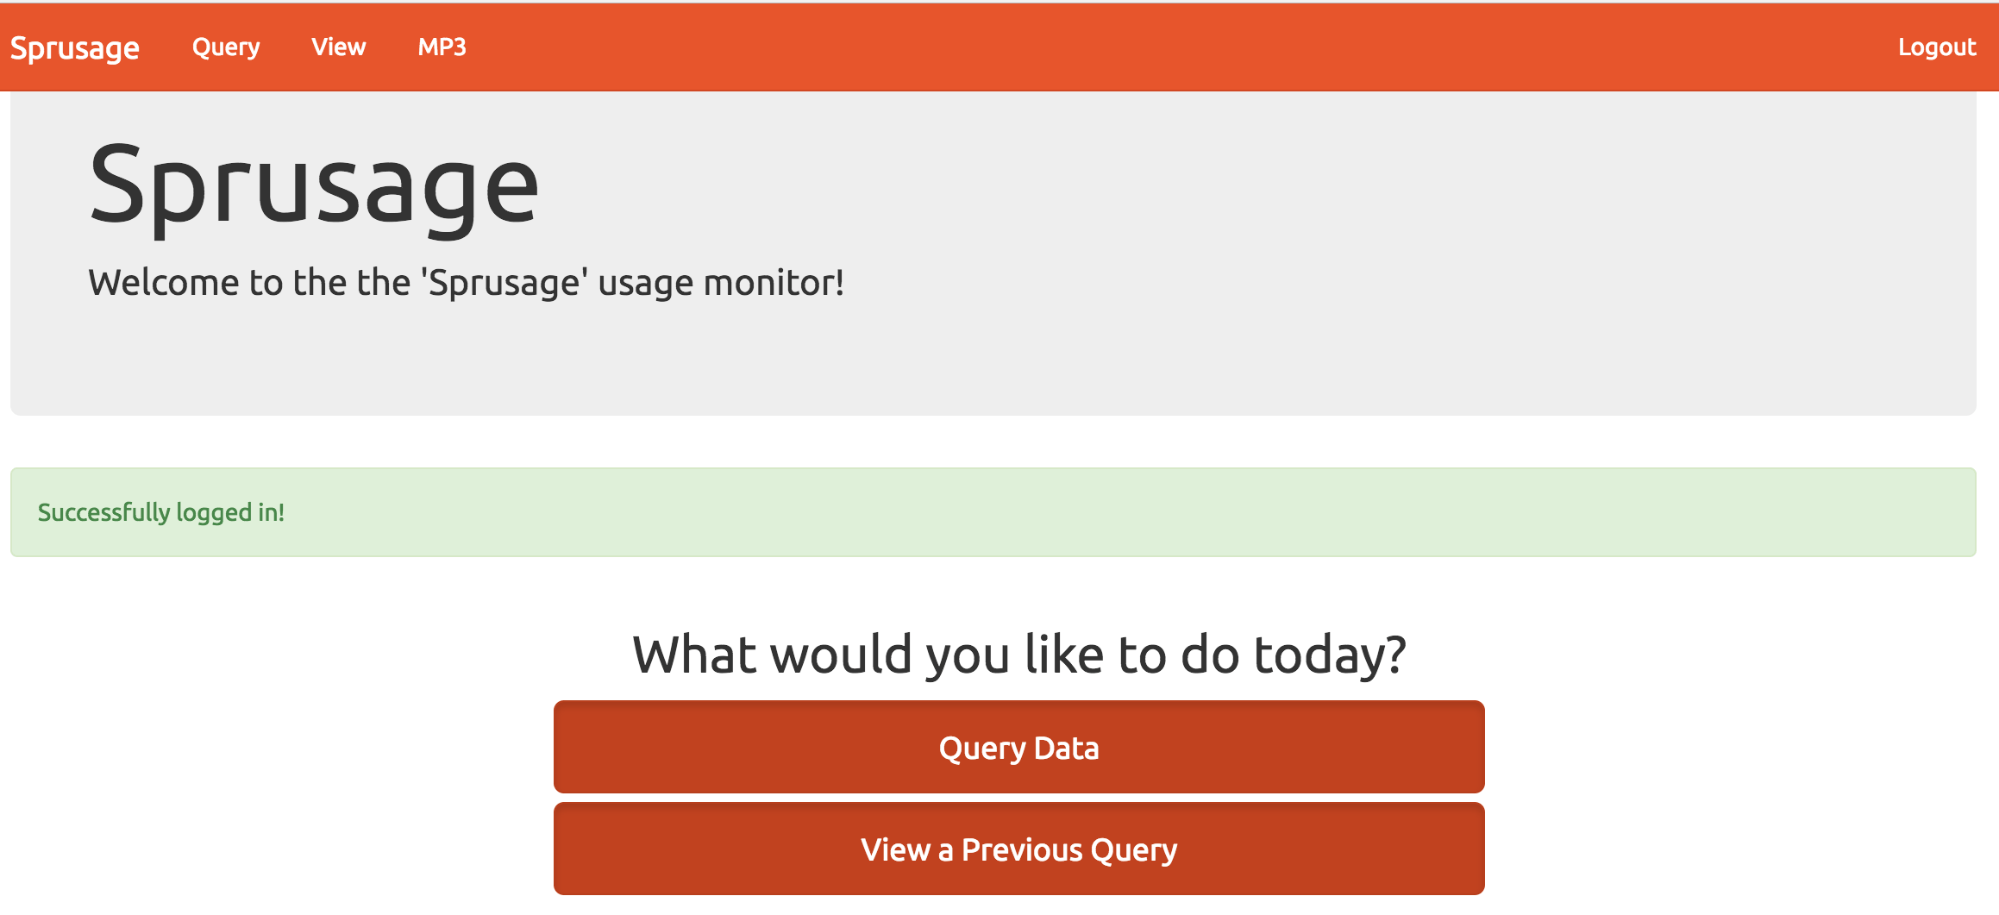 Sprusage Login Query Page